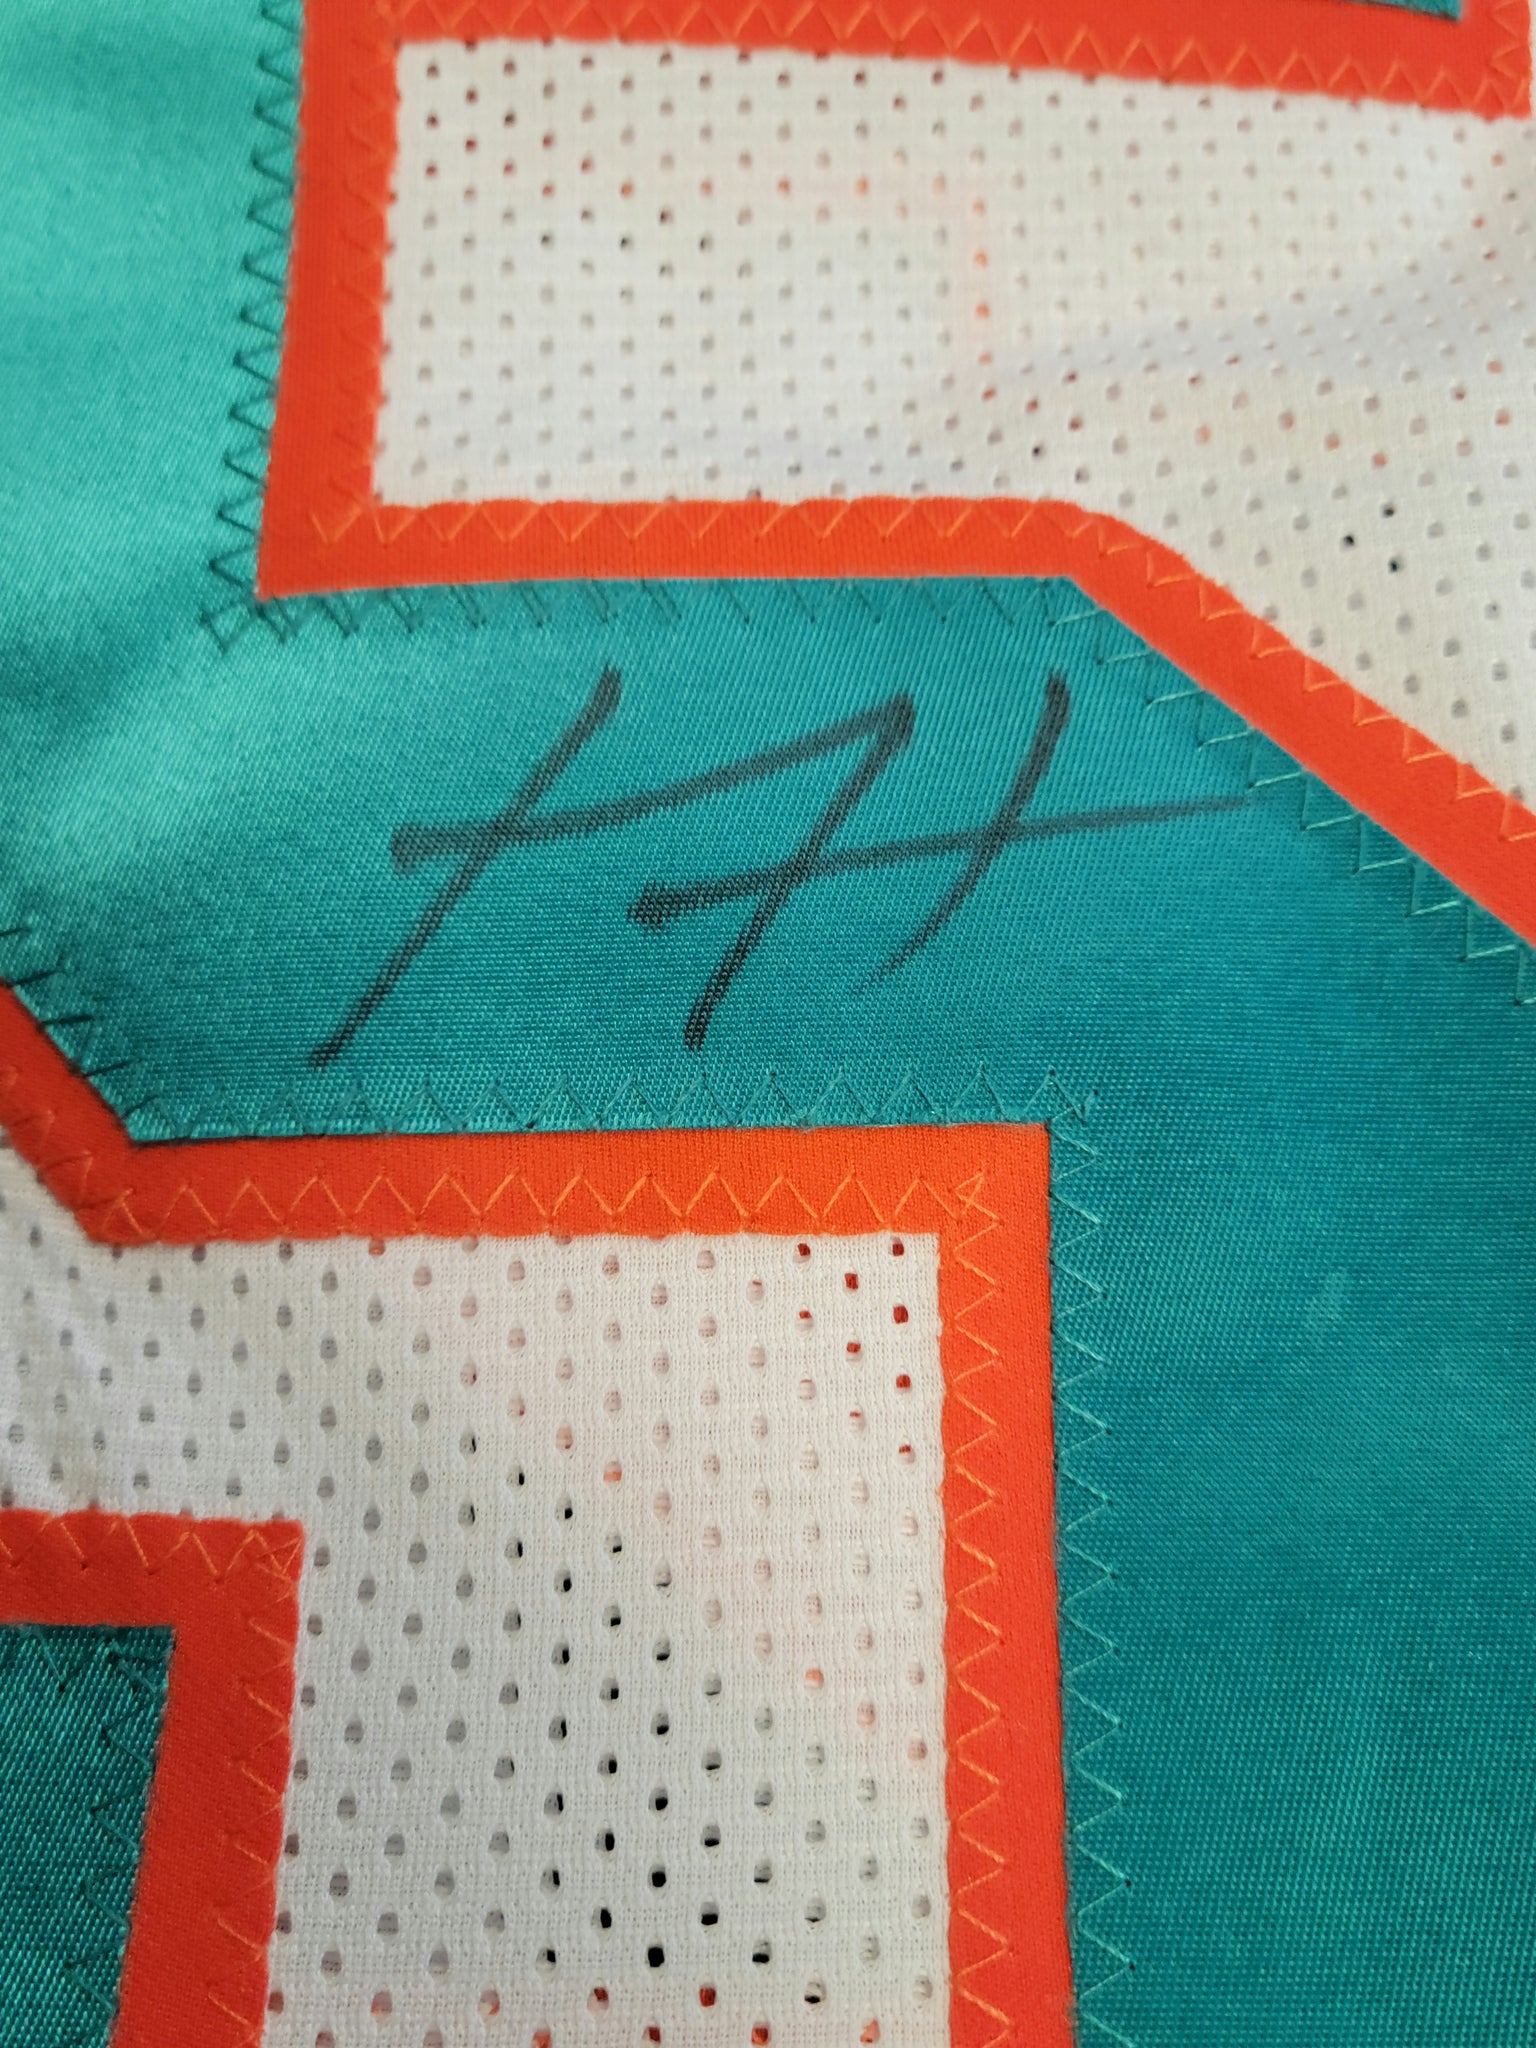 Xavien Howard Authentic Signed Pro Style Jersey Autographed JSA-